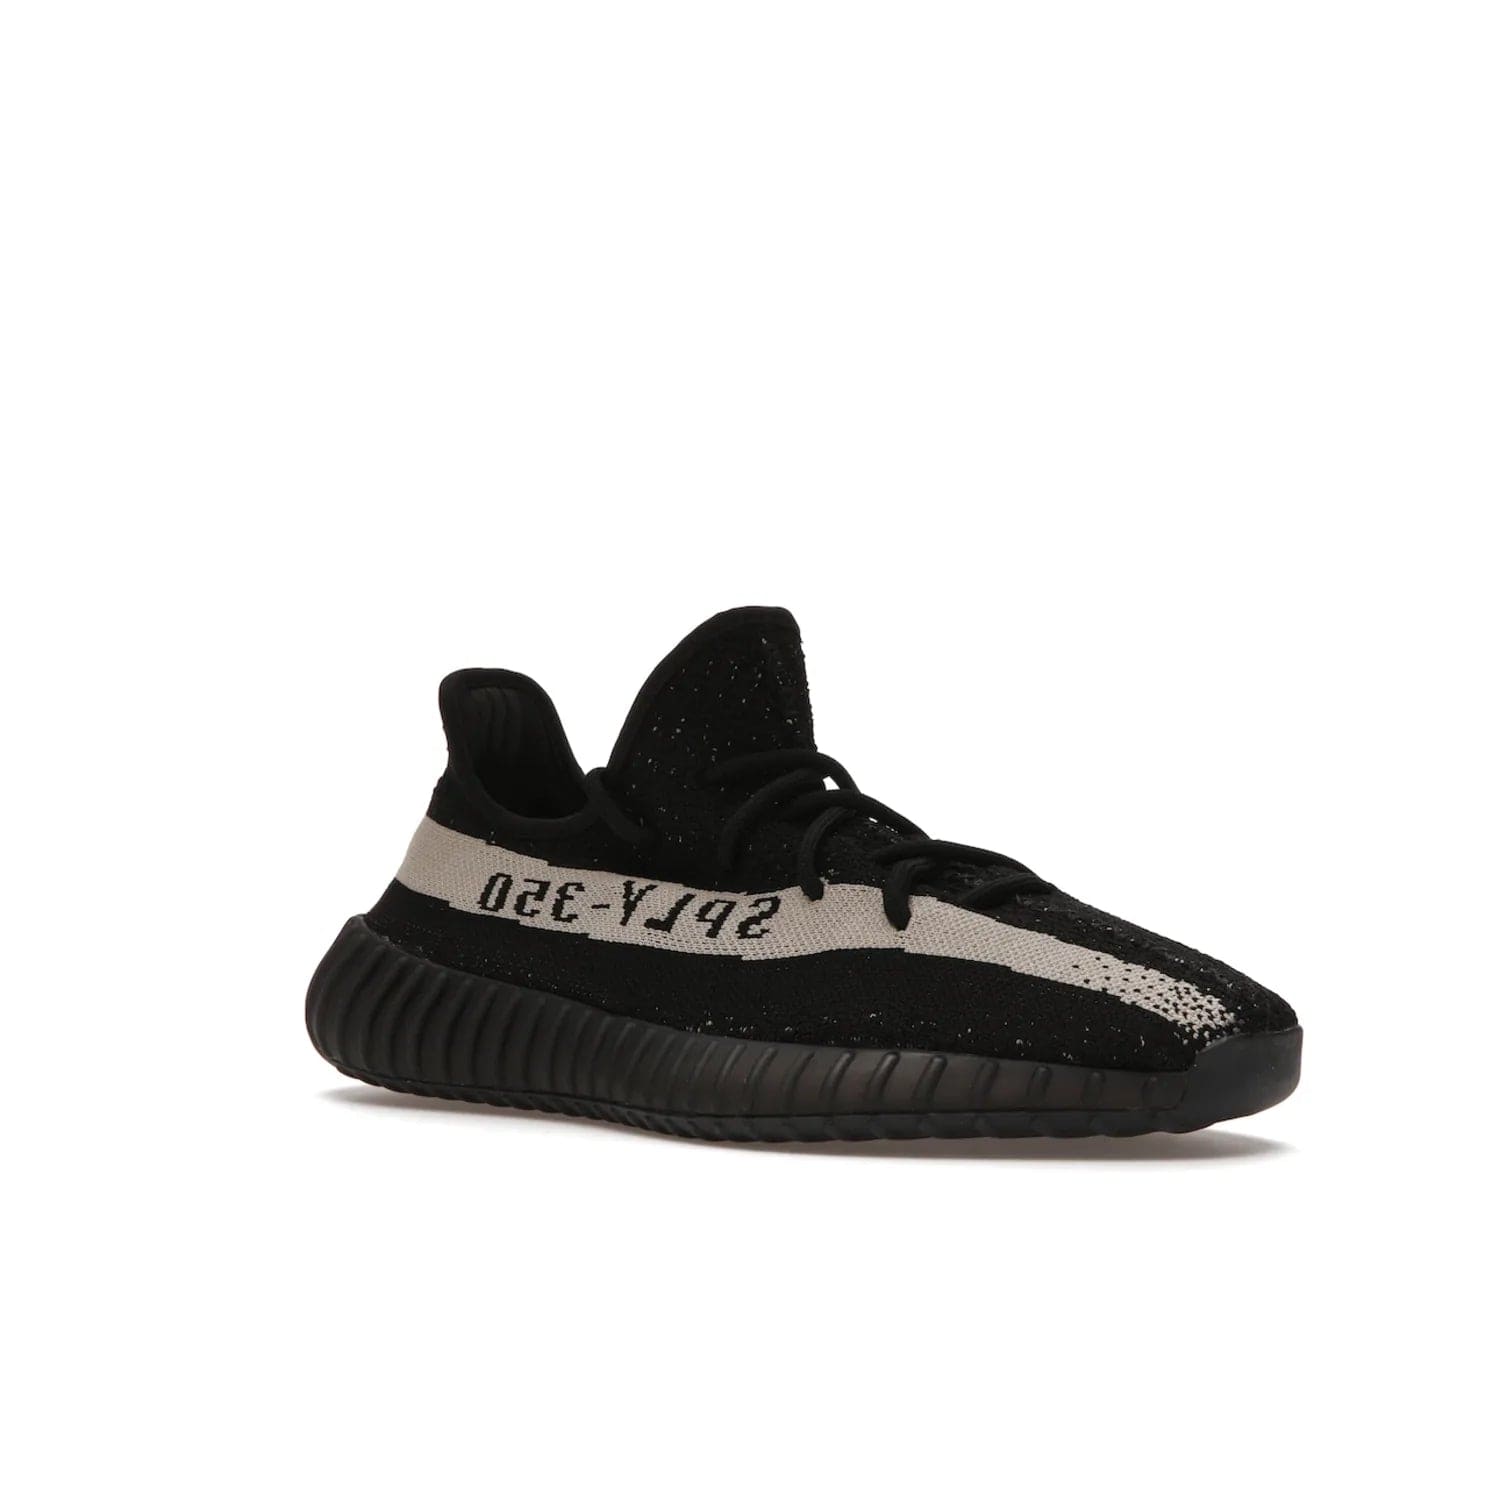 adidas Yeezy Boost 350 V2 Core Black White (2016/2022) - Image 5 - Only at www.BallersClubKickz.com - Stylish adidas Yeezy Boost 350 V2 in classic black with white "SPLY-350" stitched to the side stripe. Features Primeknit upper & Boost sole for comfort. Restock in March 2022.